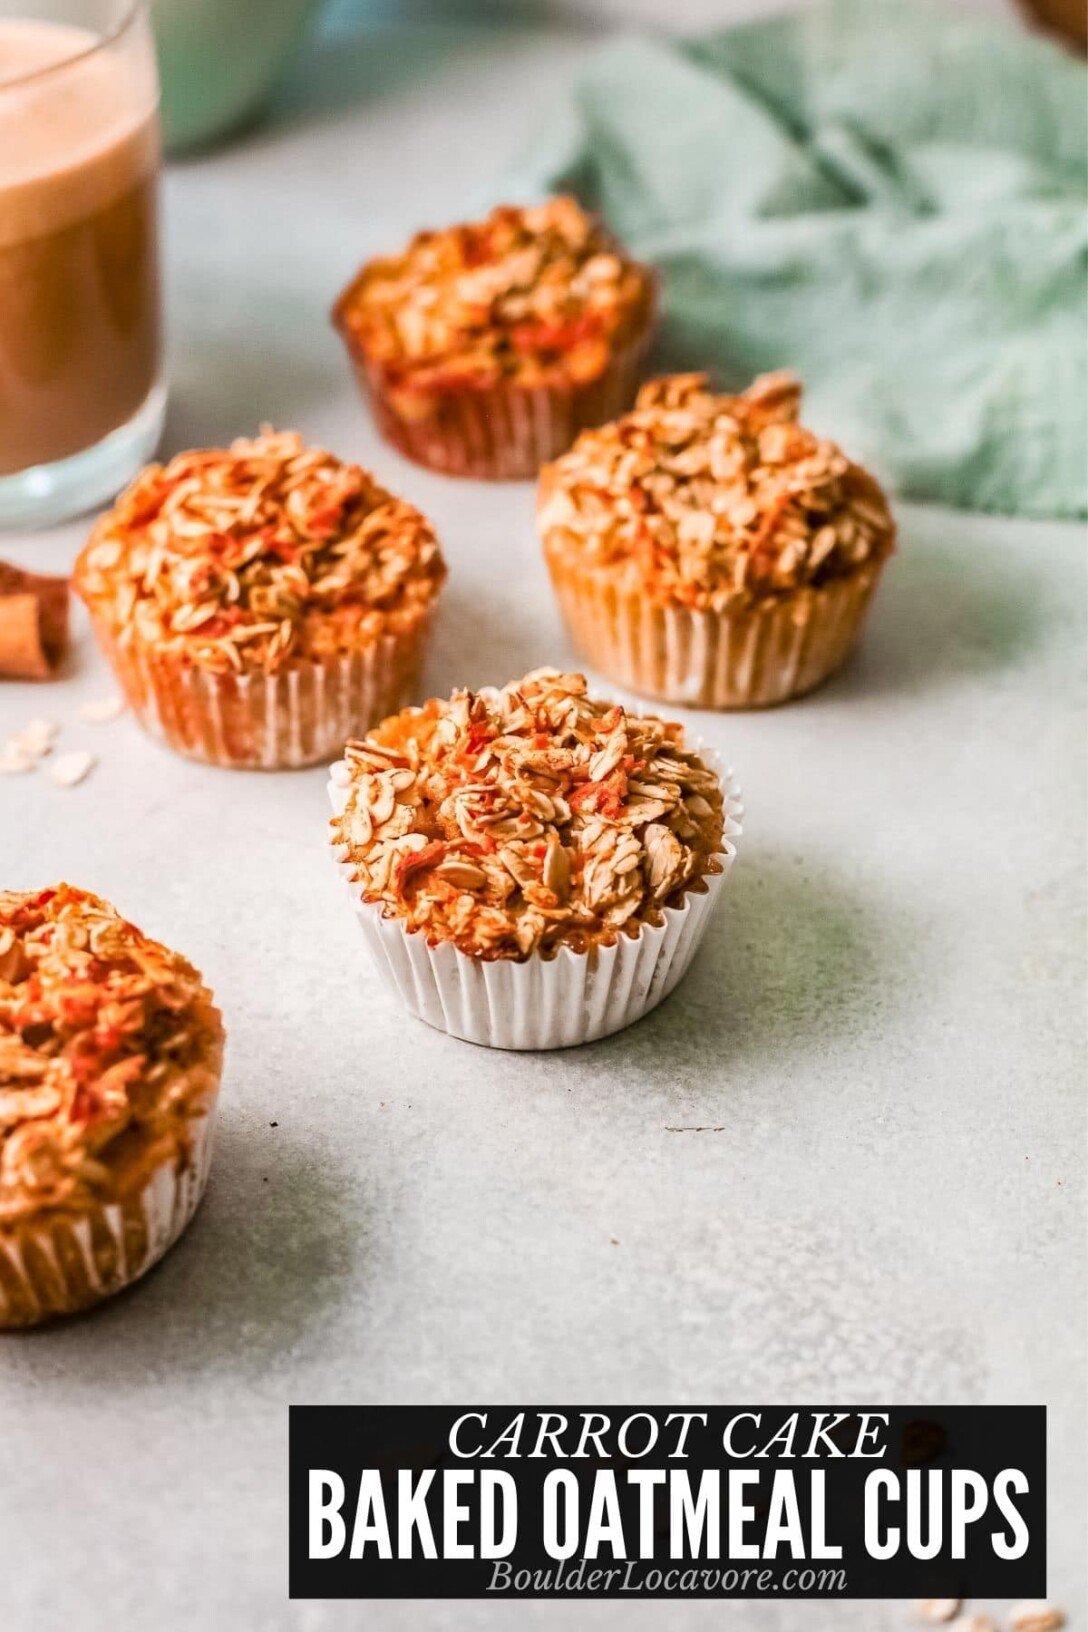 carrot cake baked oatmeal cups title